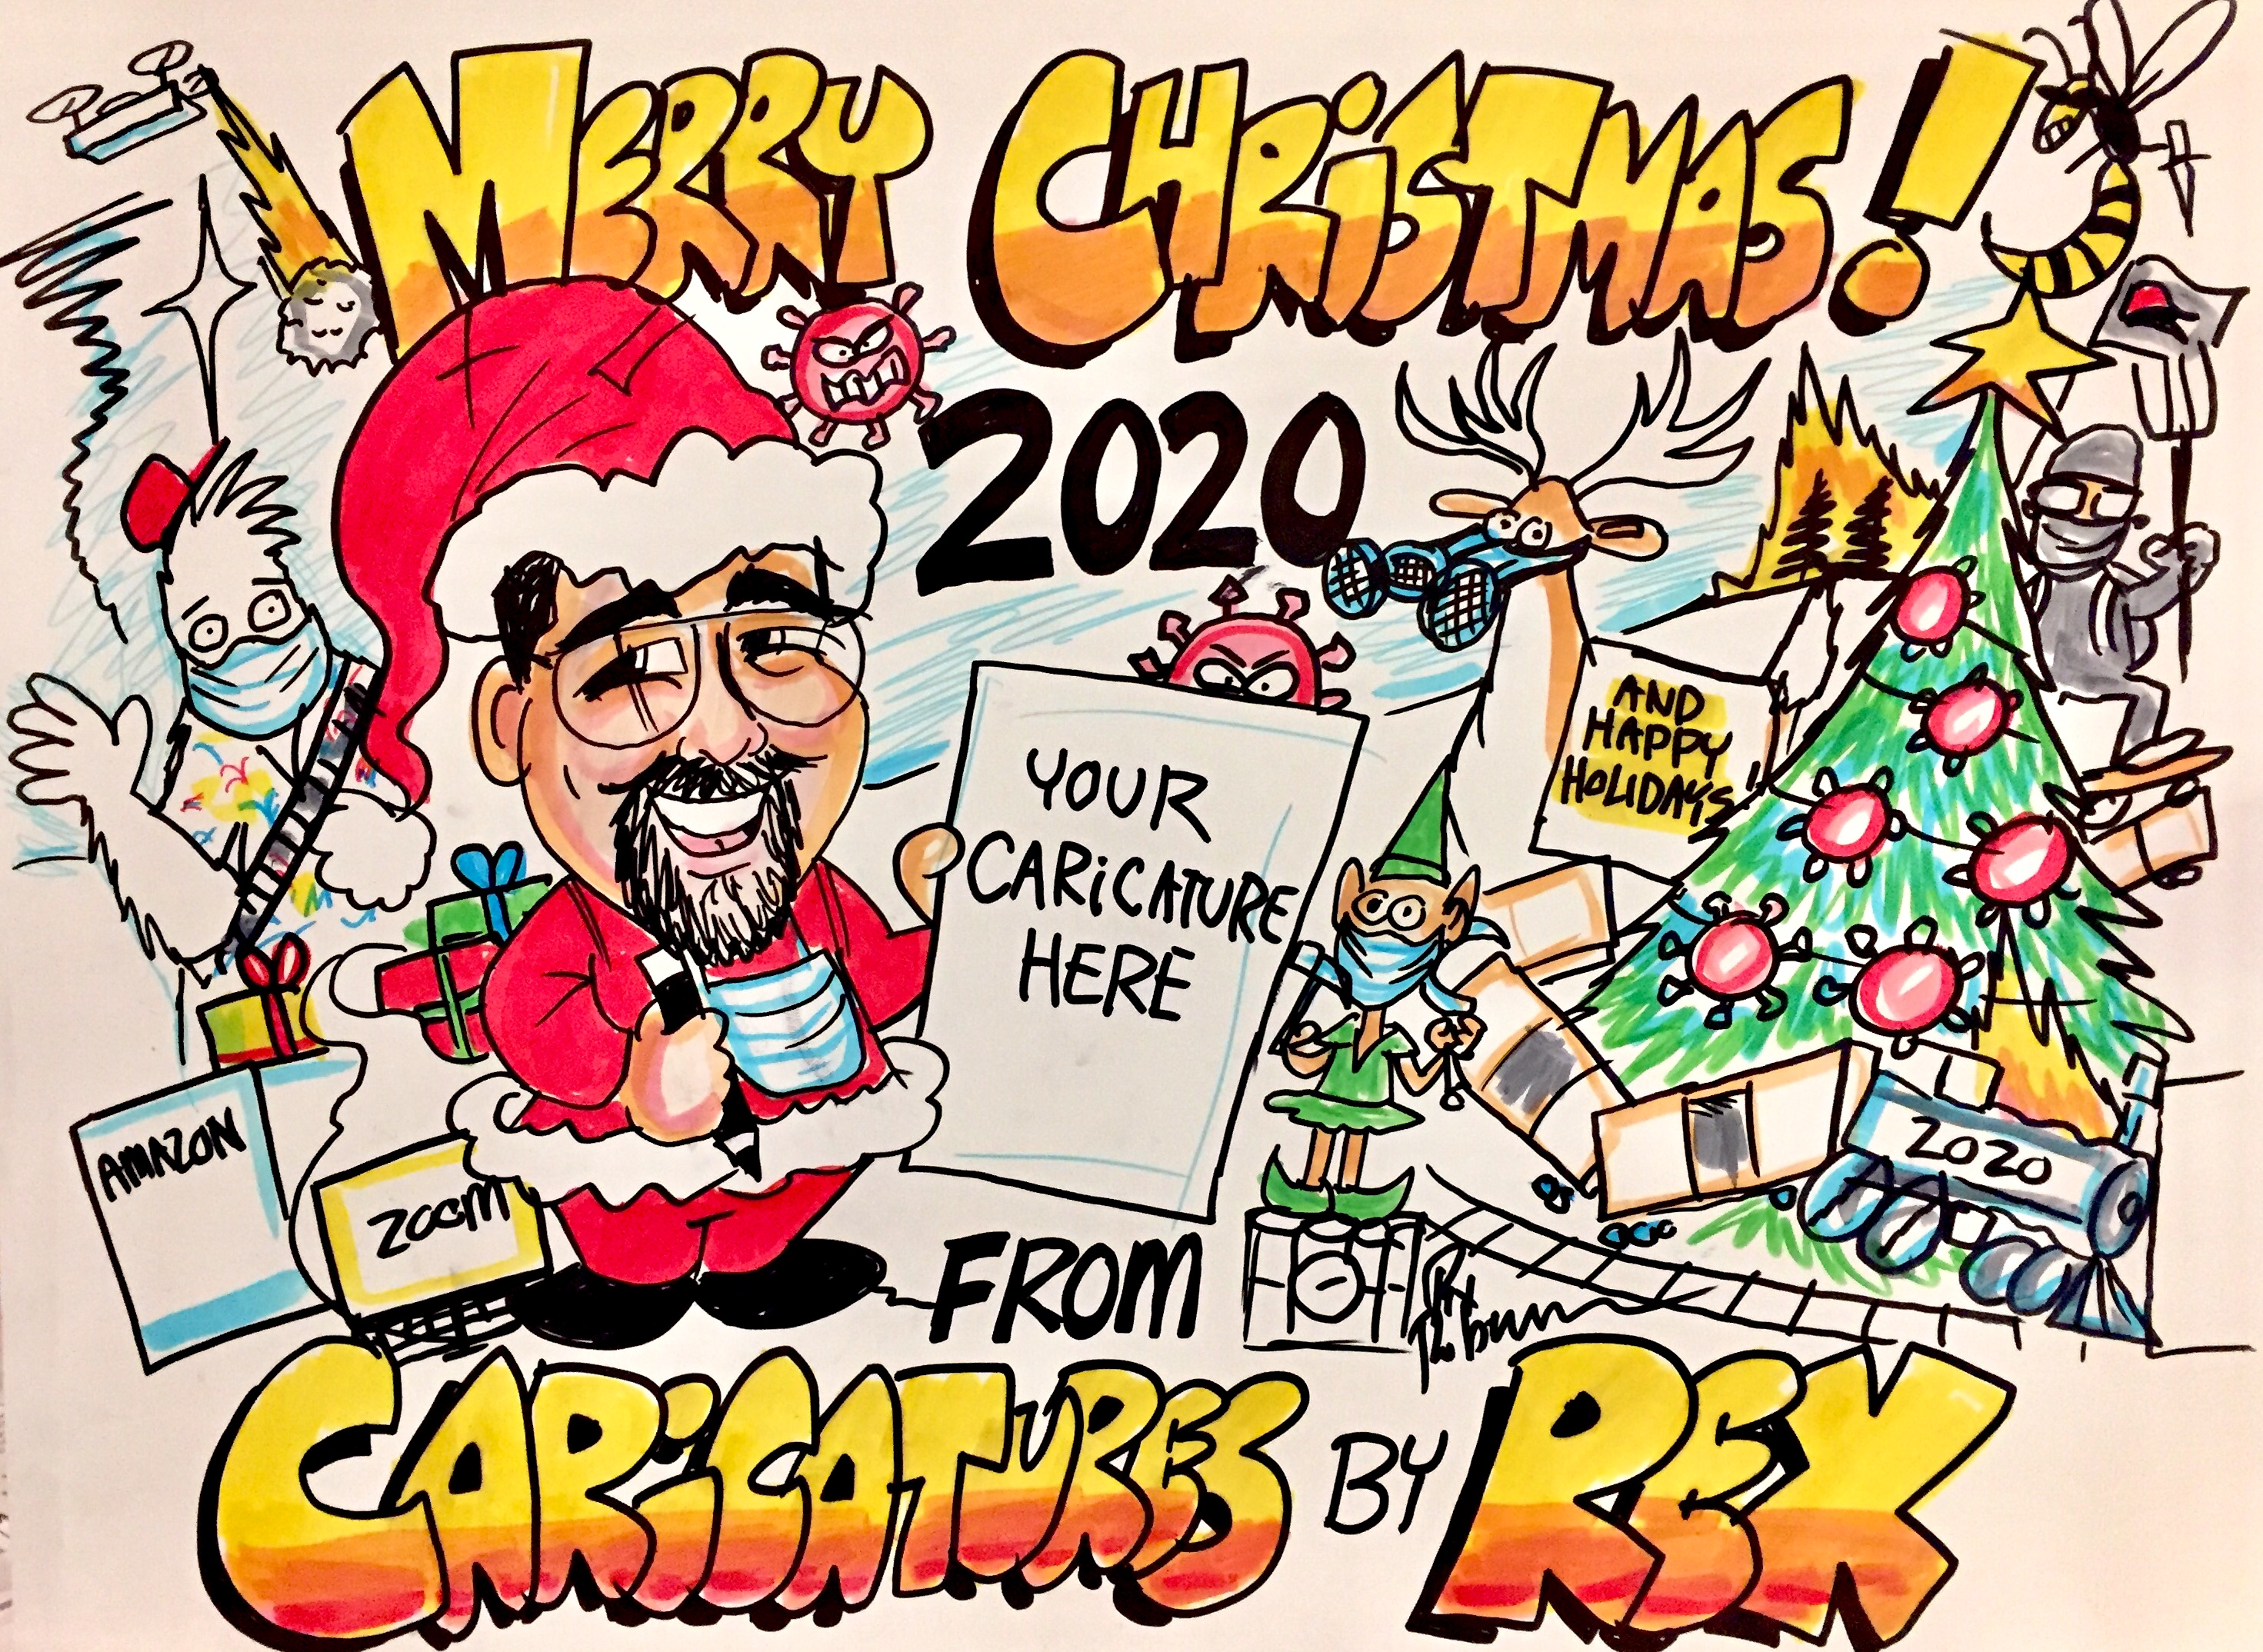 Merry Christmas 2020 from Caricatures by Rex